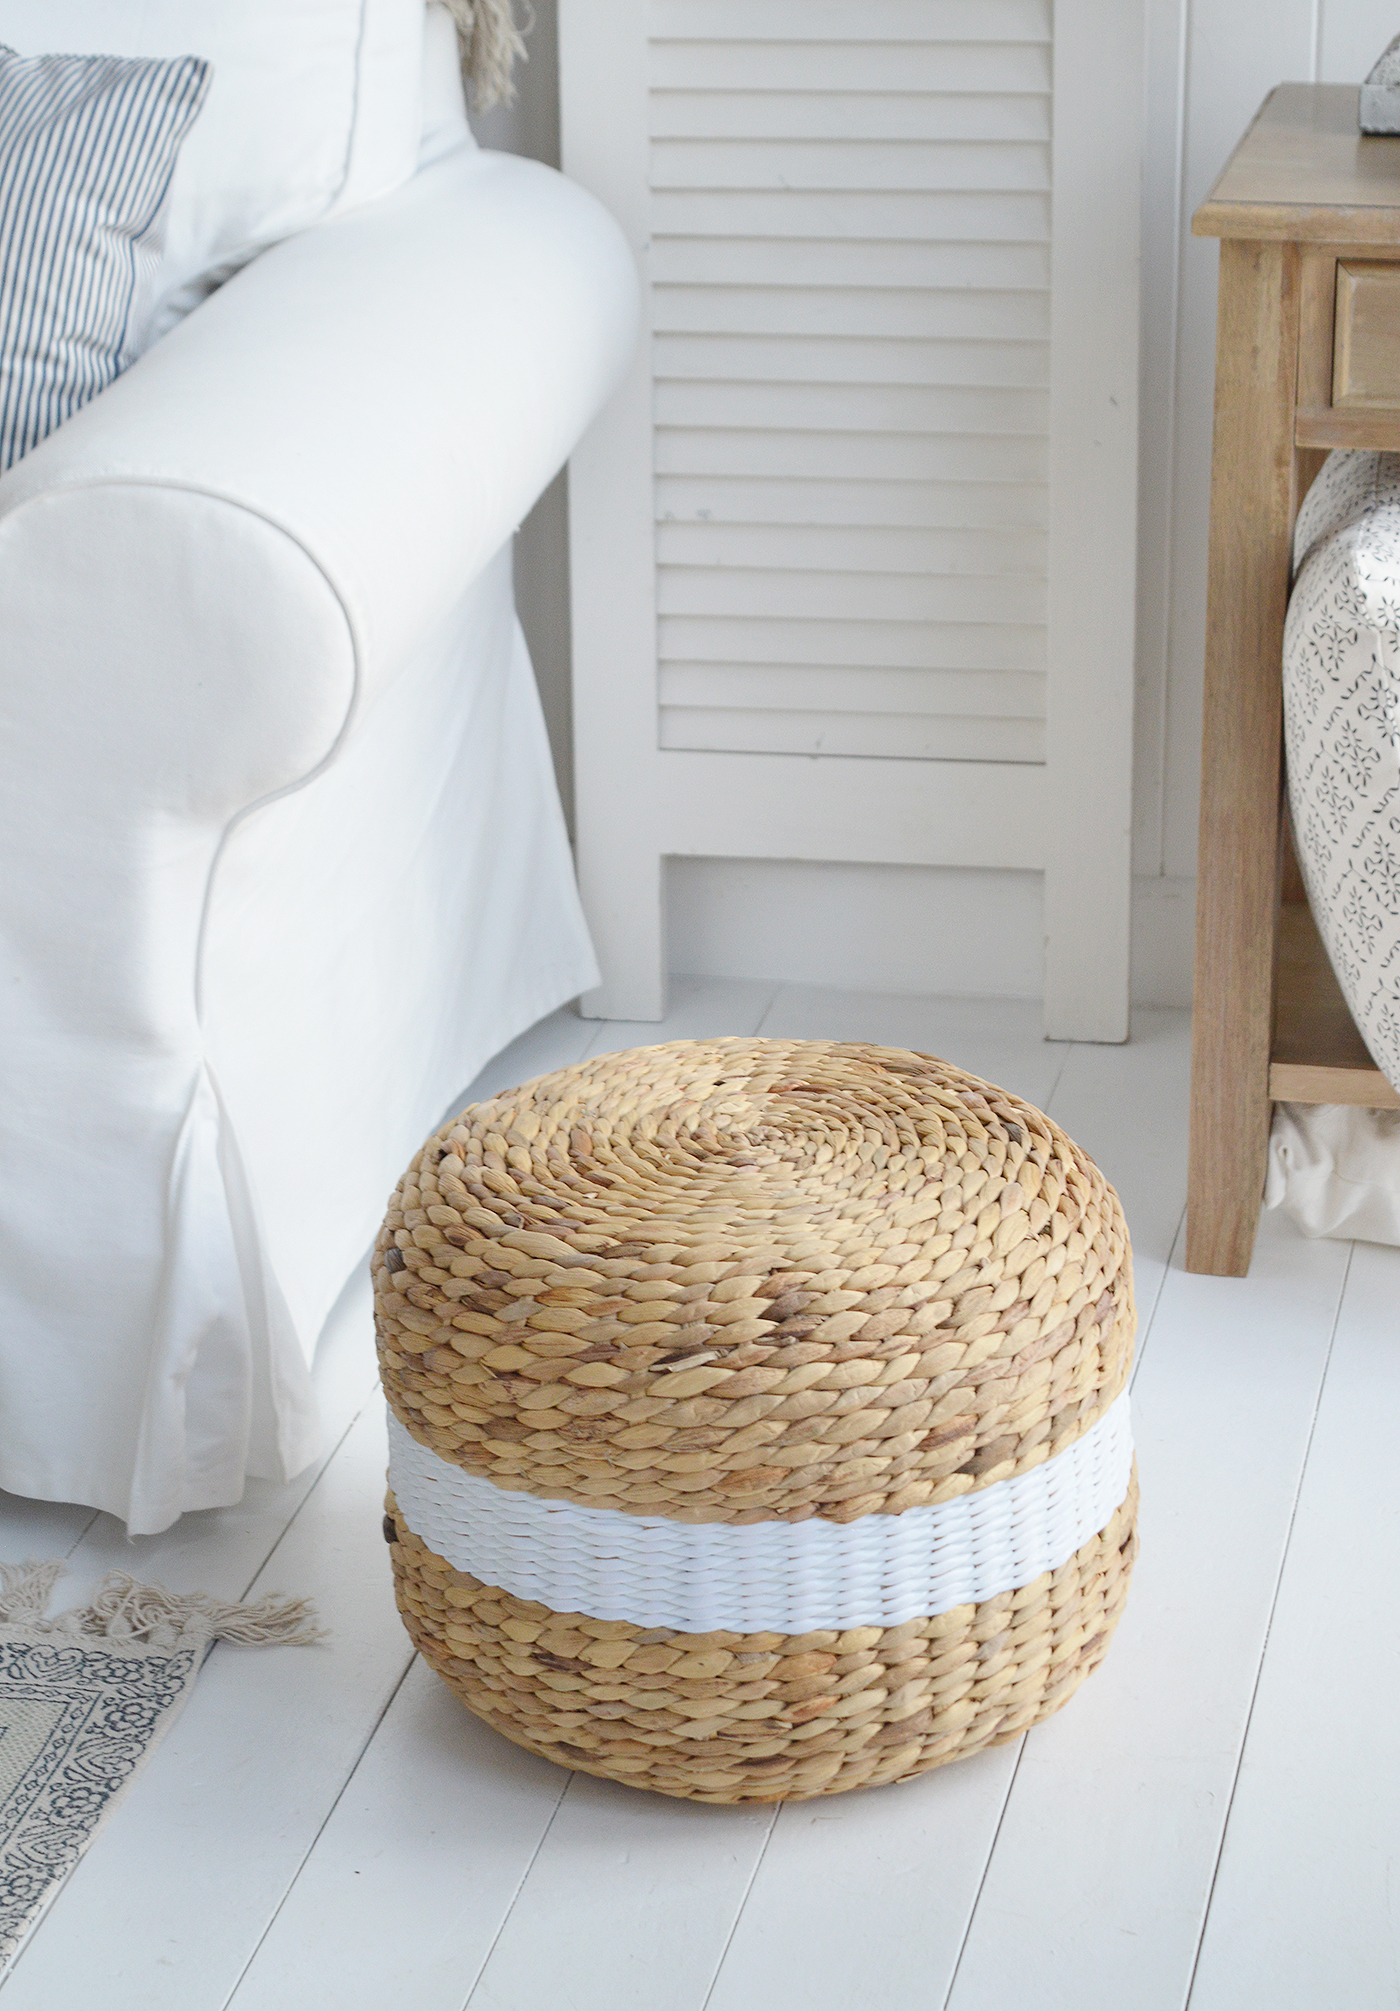 Freedom Seagrass Stool, Seat or side table - Coastal, Modern Country and Farmhouse New England Living Room Furniture